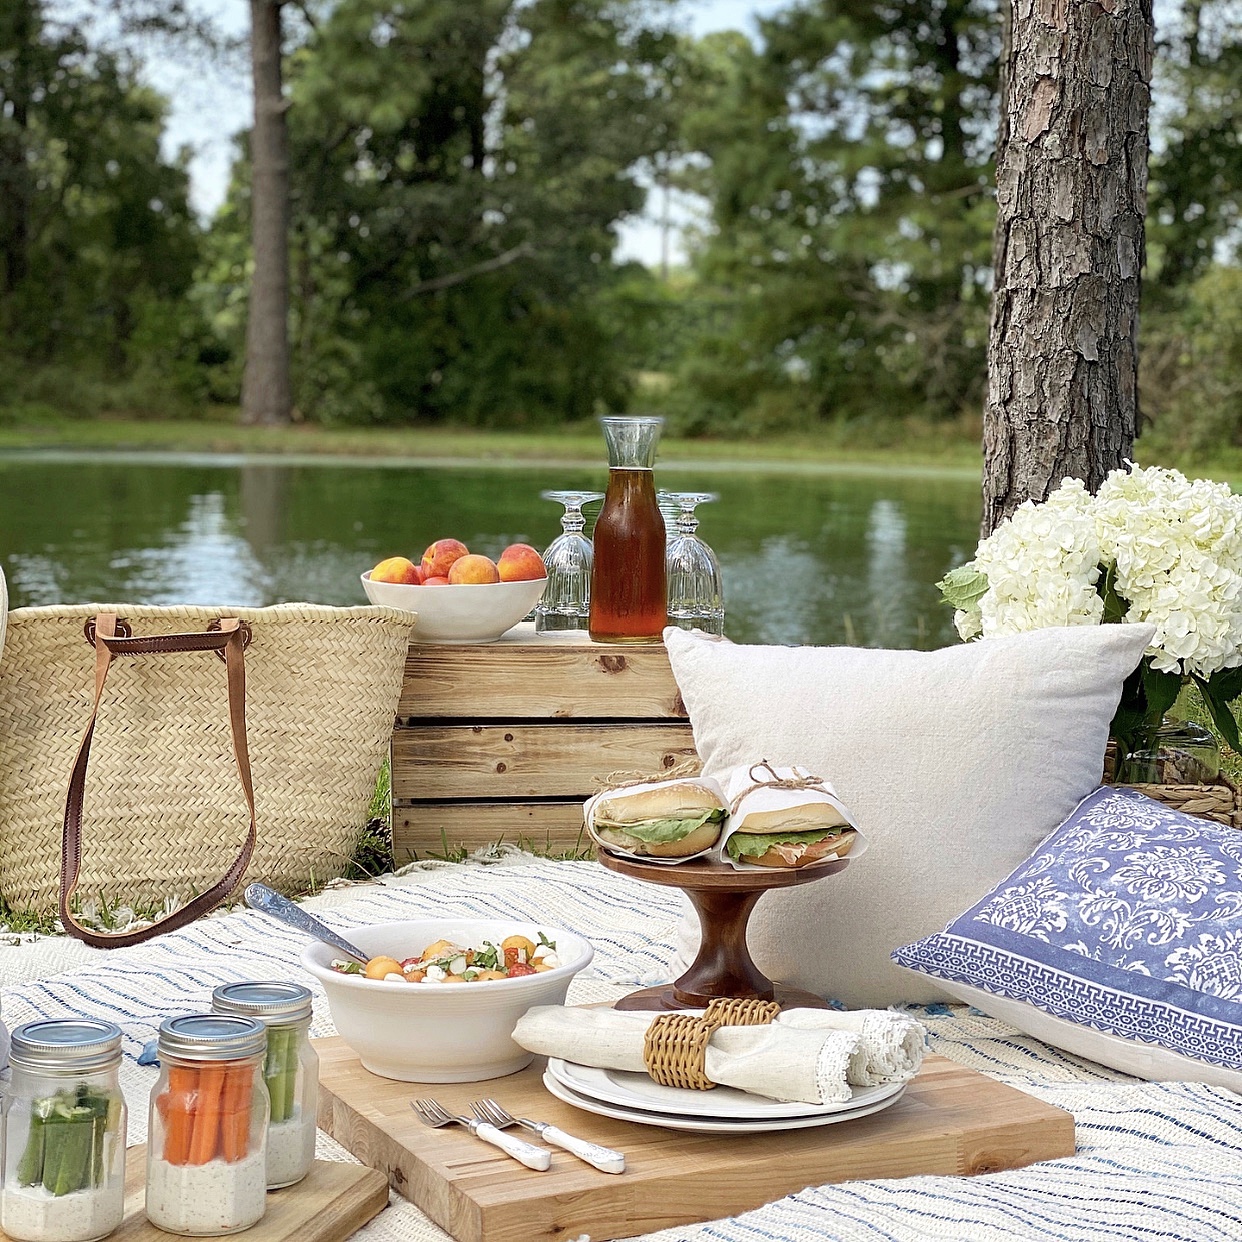 The Best Picnic Baskets on the Market in 2020